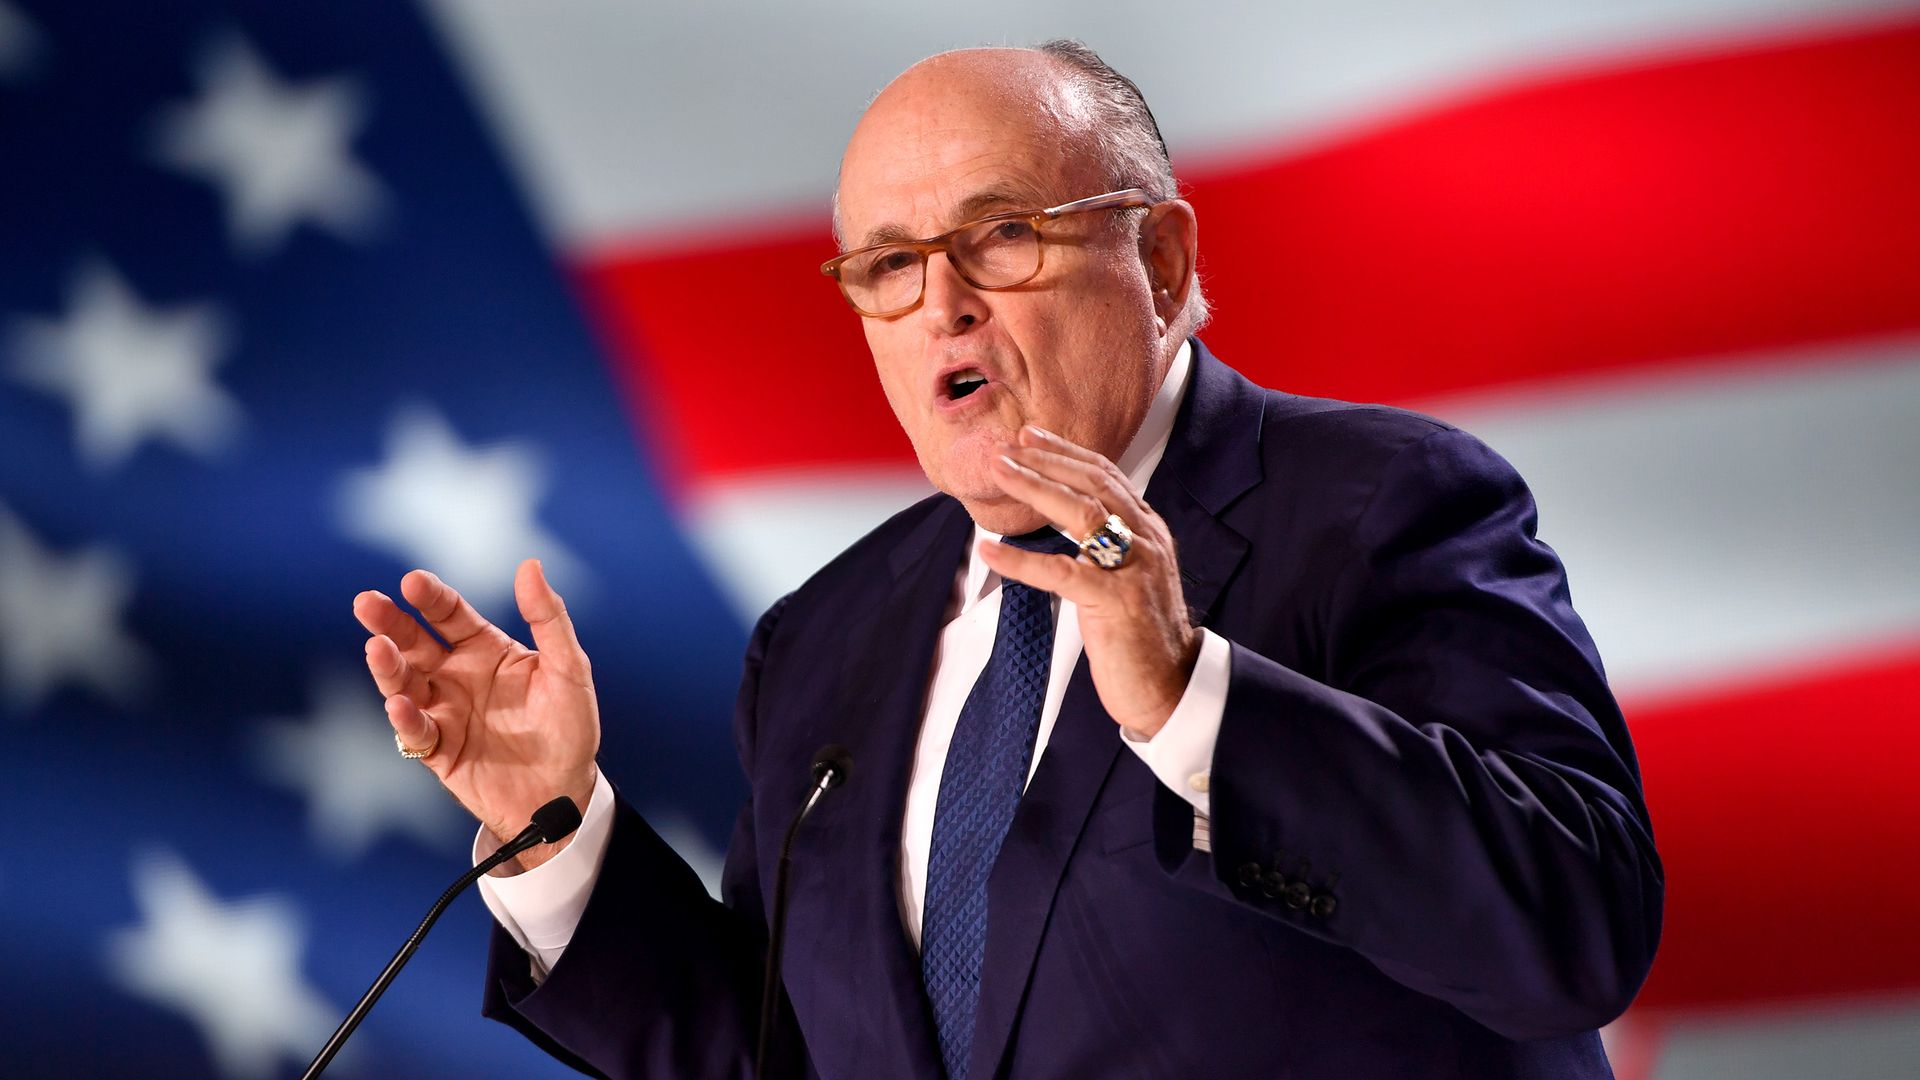 Rudy Giuliani says the Mueller report line about not exonerating President Trump is a "cheap shot."